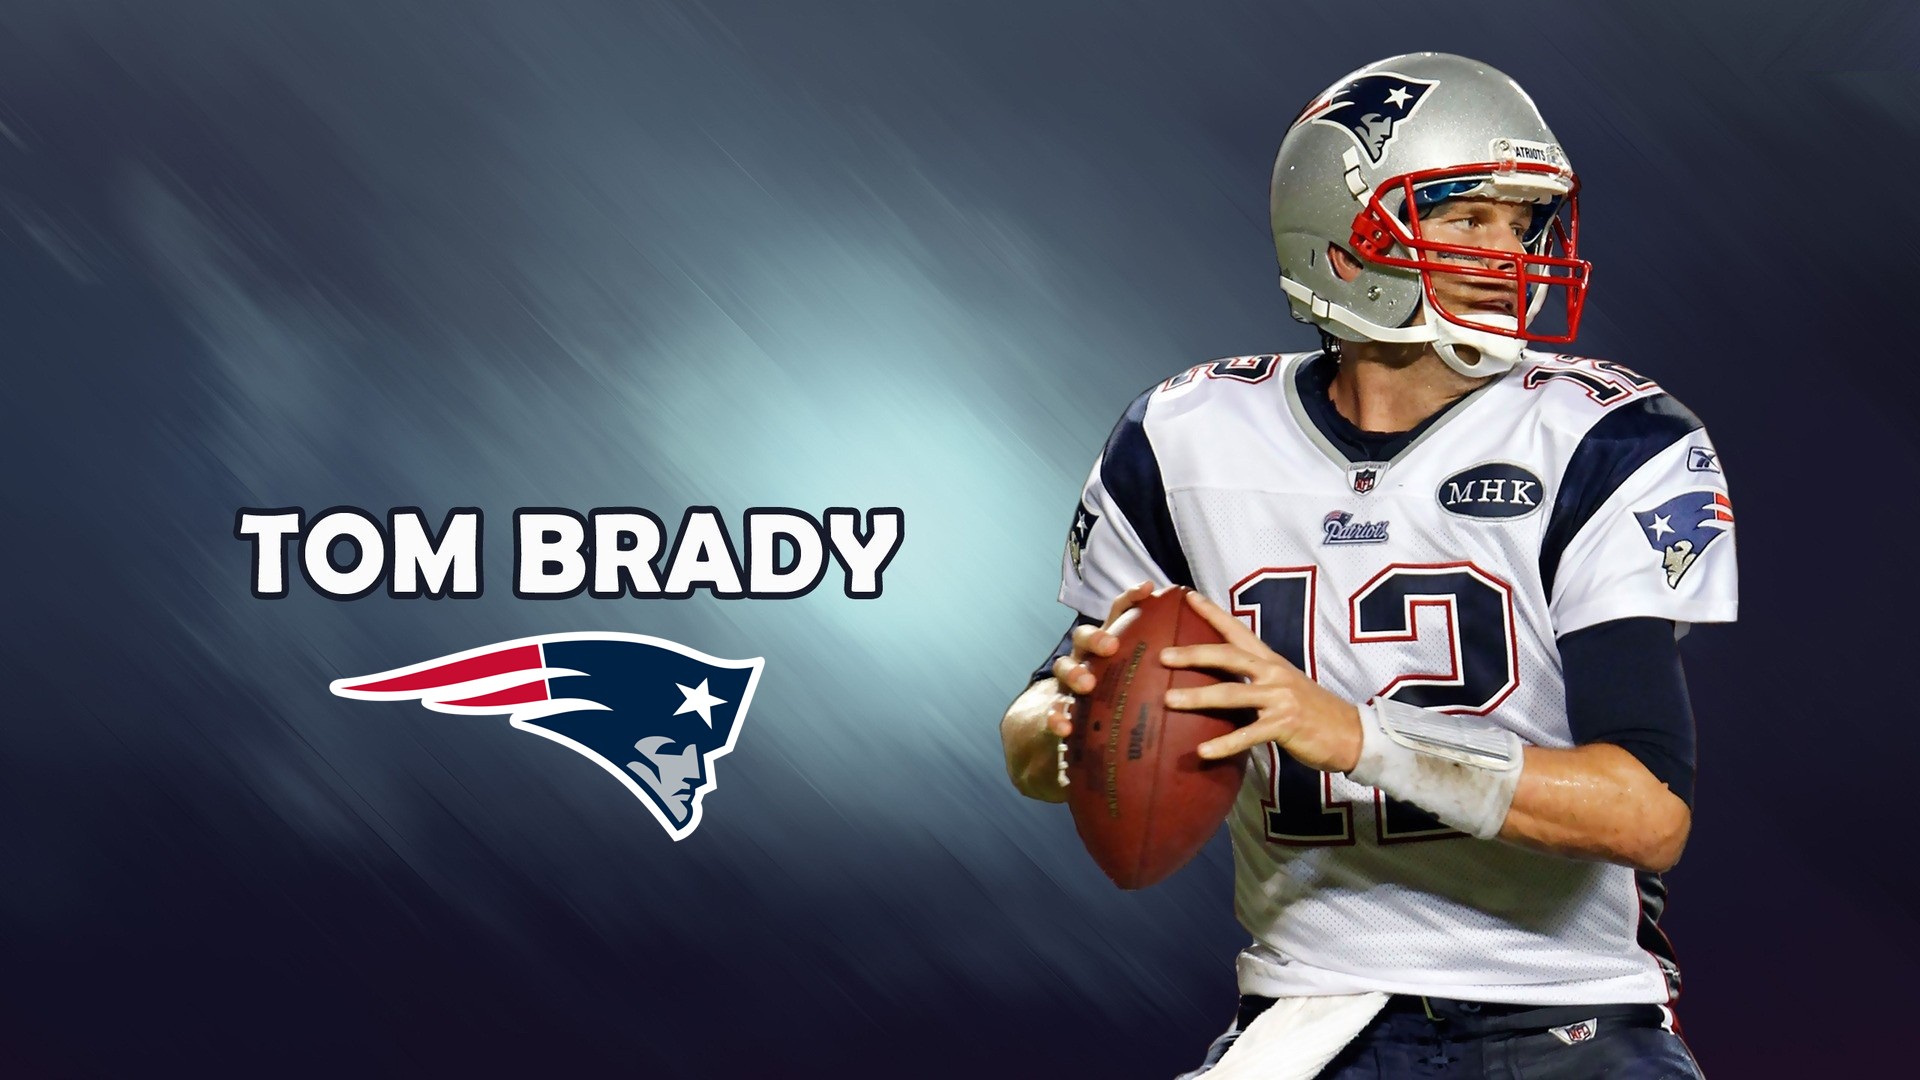 Wallpapers HD Tom Brady Patriots with resolution 1920x1080 pixel. You can make this wallpaper for your Mac or Windows Desktop Background, iPhone, Android or Tablet and another Smartphone device